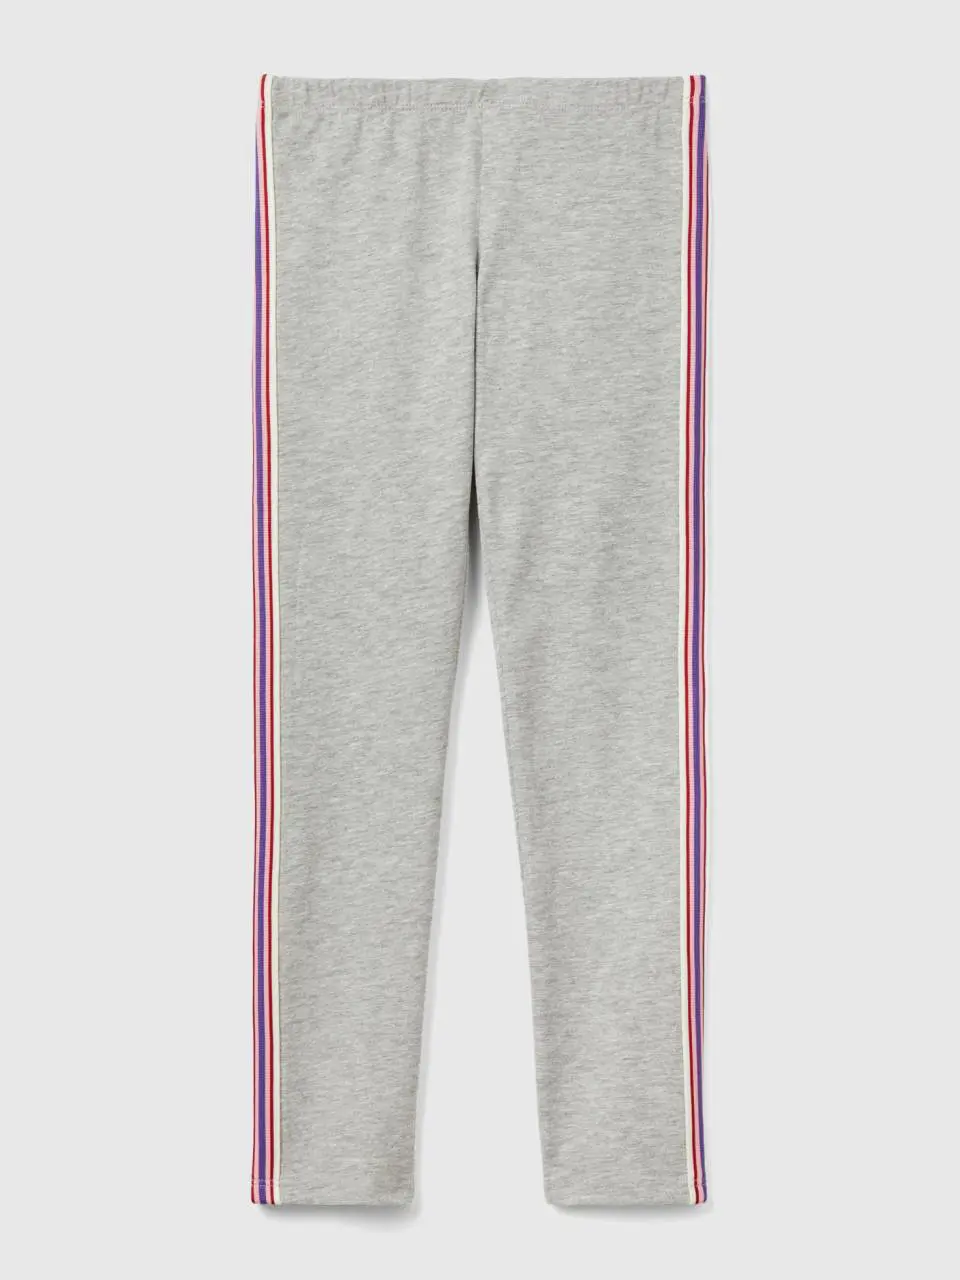 Benetton leggings with striped details. 1